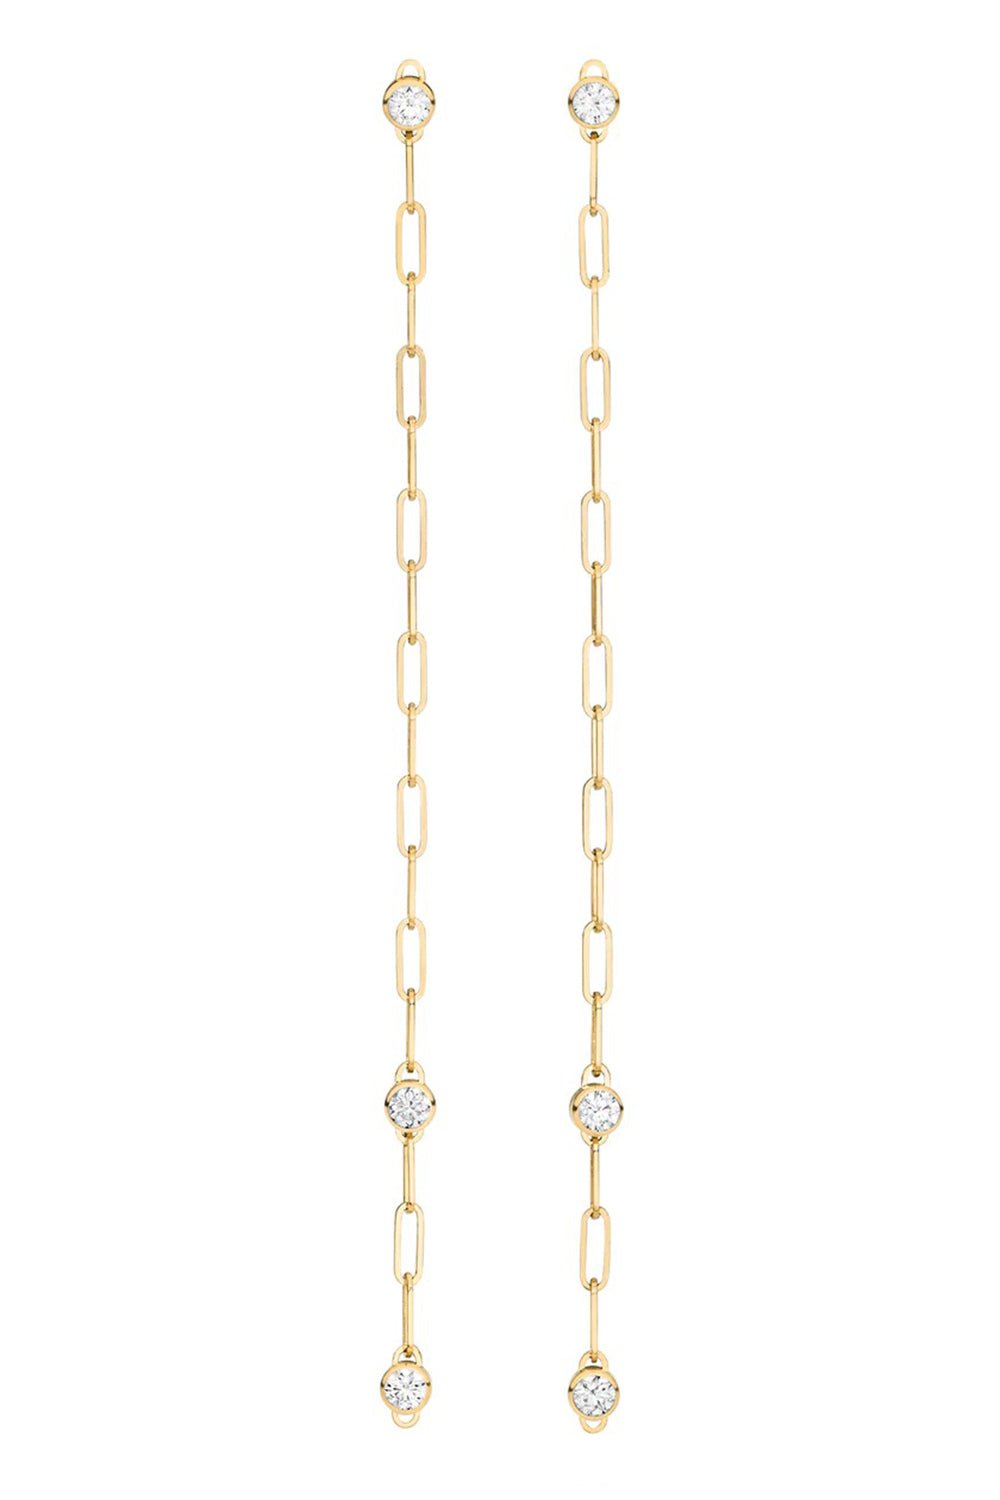 NOUVEL HERITAGE-Round Trio Earrings-YELLOW GOLD